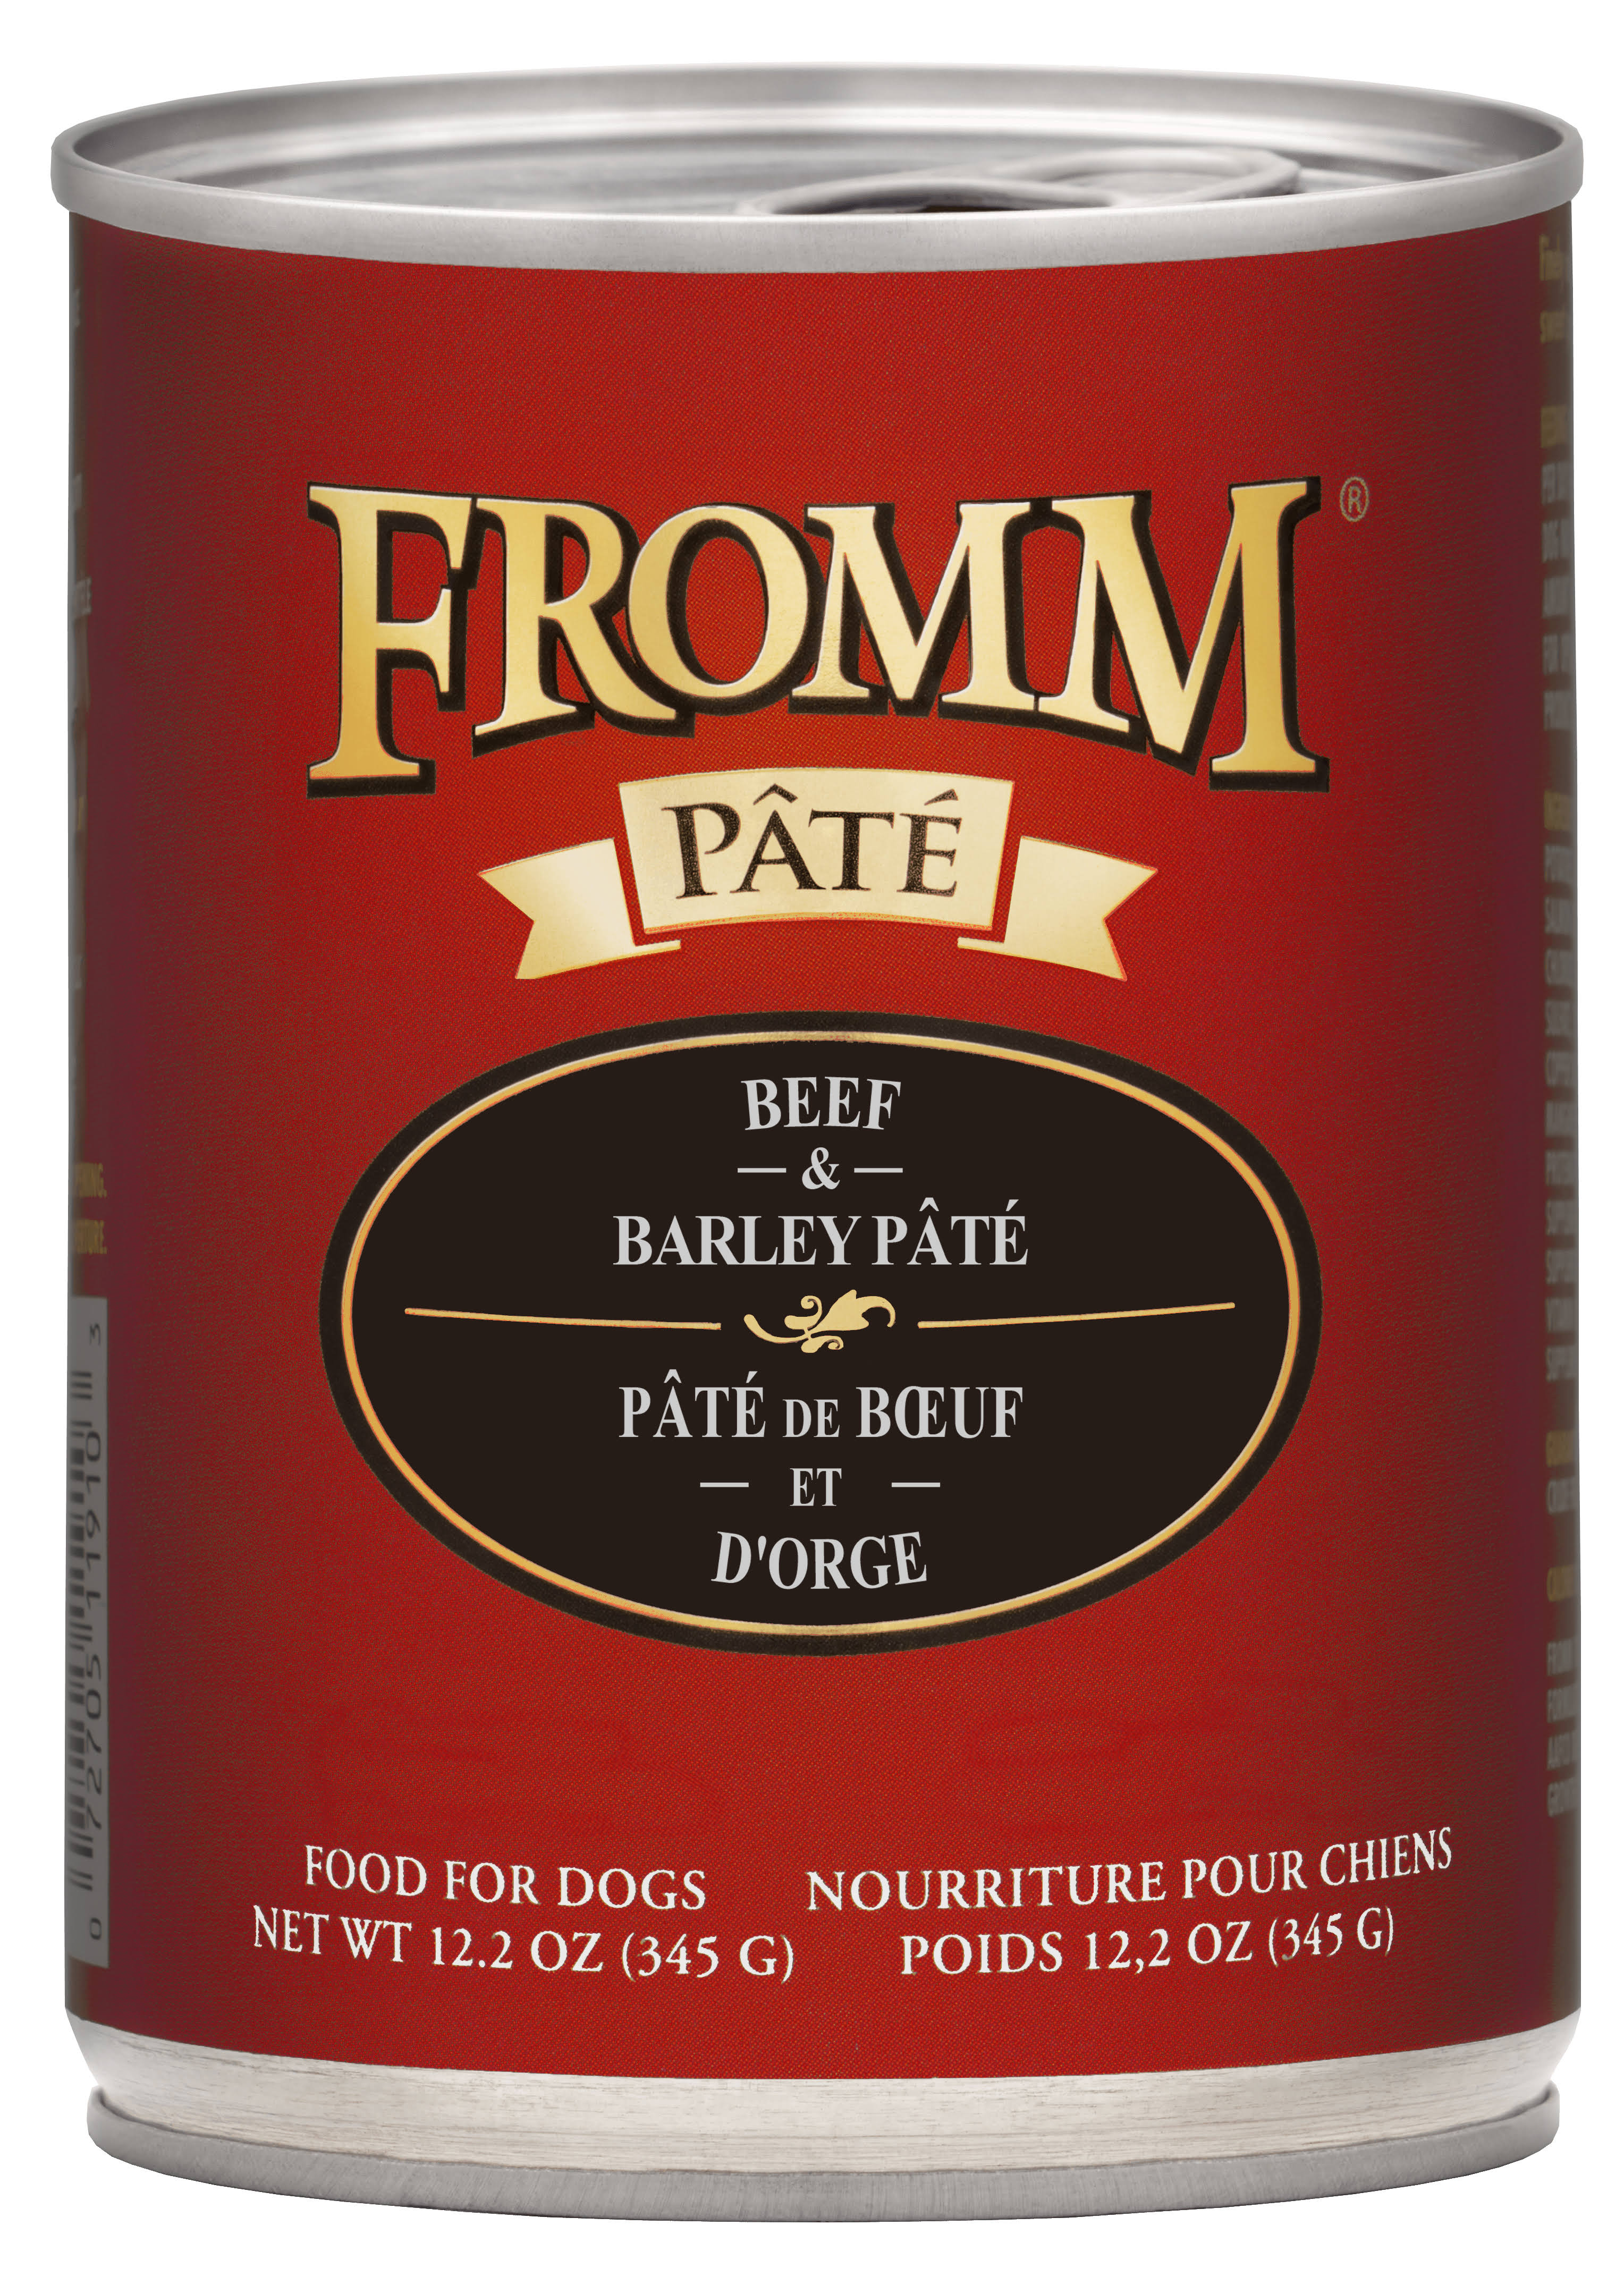 Fromm Gold Beef & Barley Pate Canned Dog Food